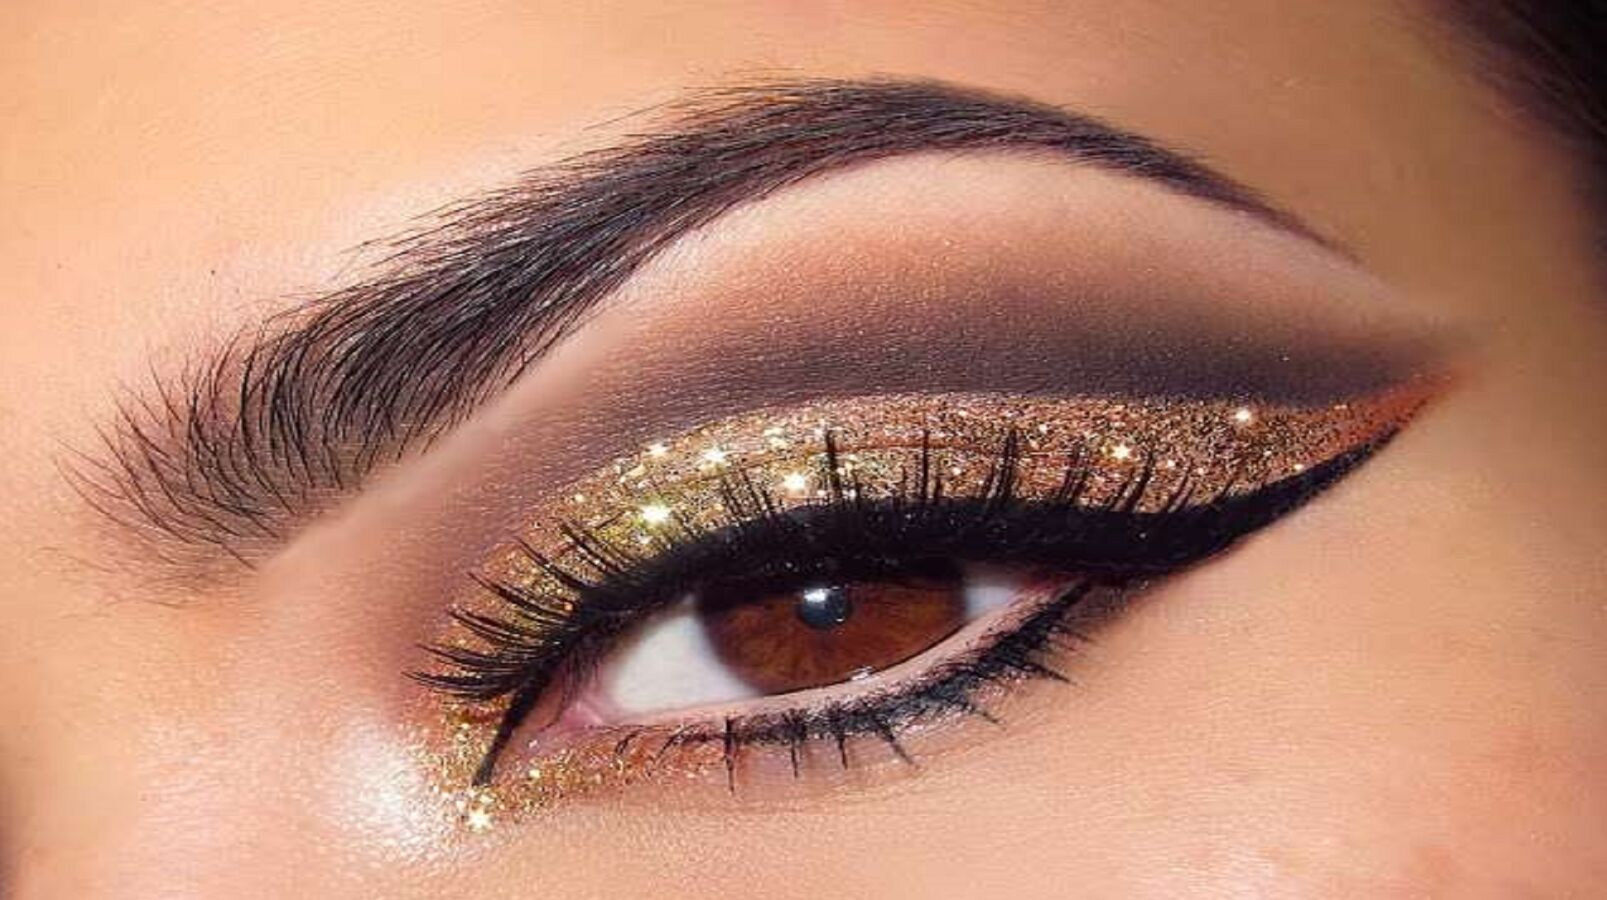 Prom Makeup Ideas For Brown Eyes 50 Most Trendy Brown Eyes Makeup Idea You Must Try For Prom Or Party